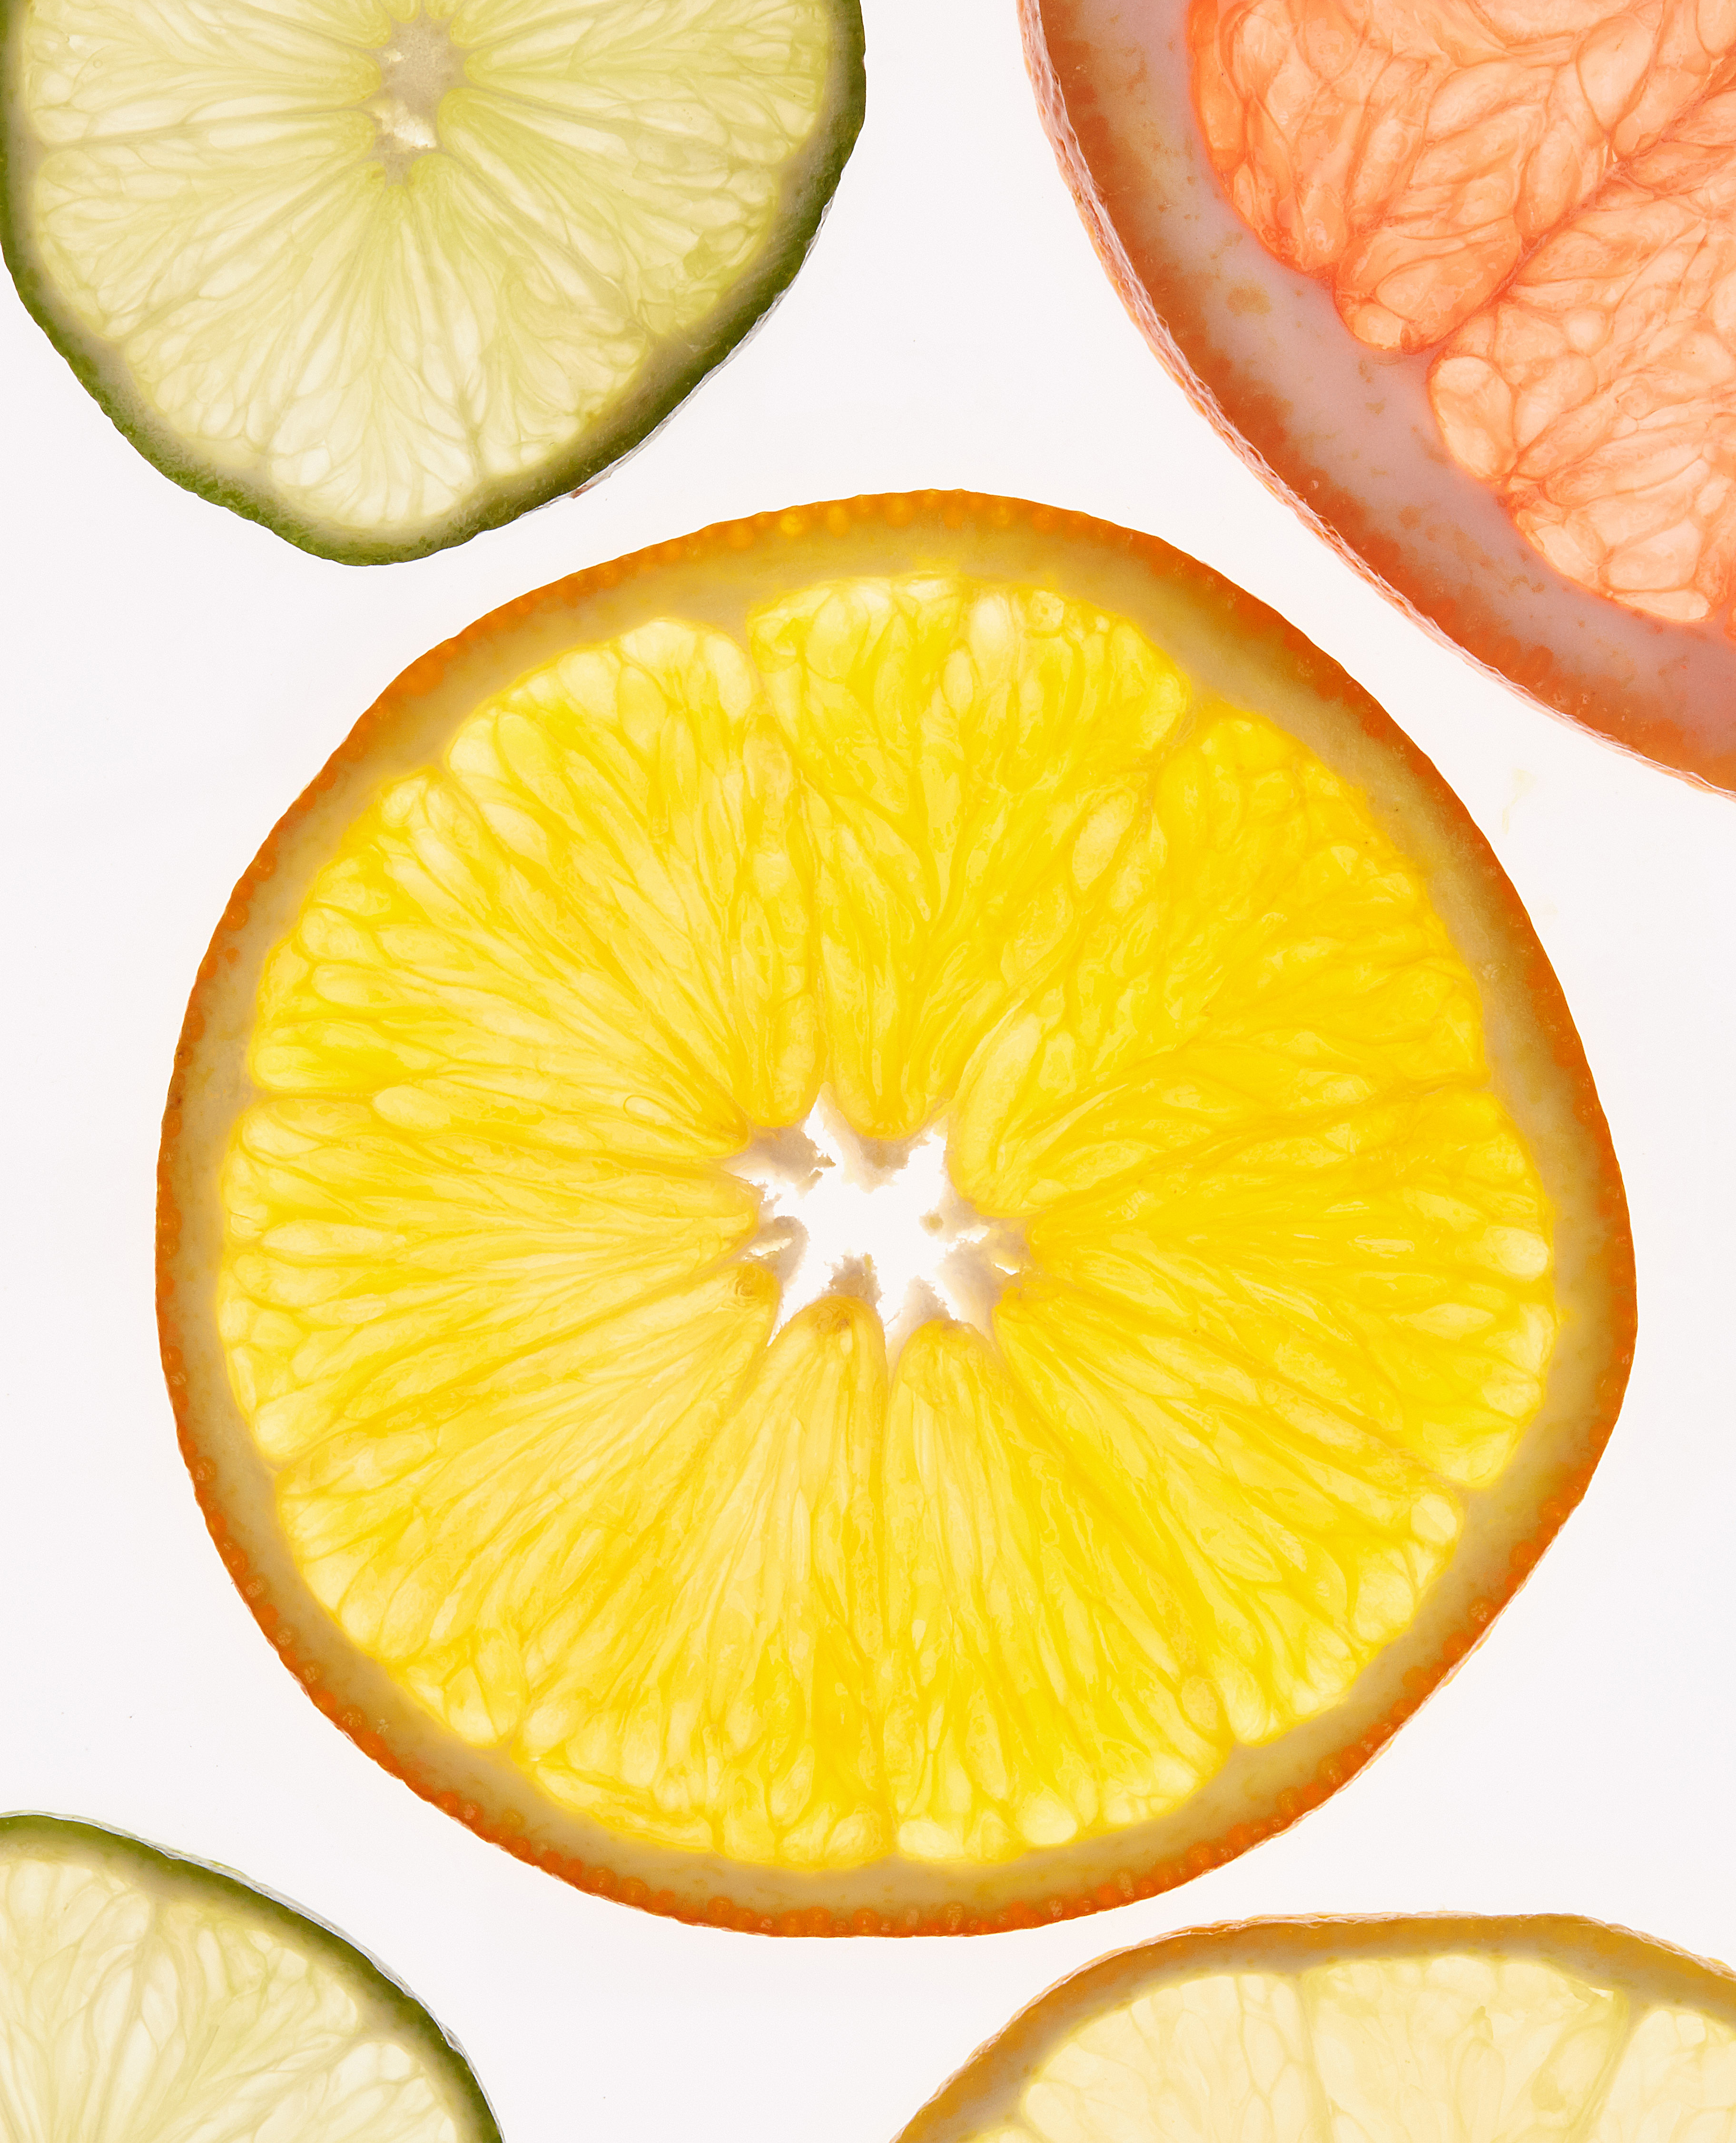 What exactly does Vitamin C do?